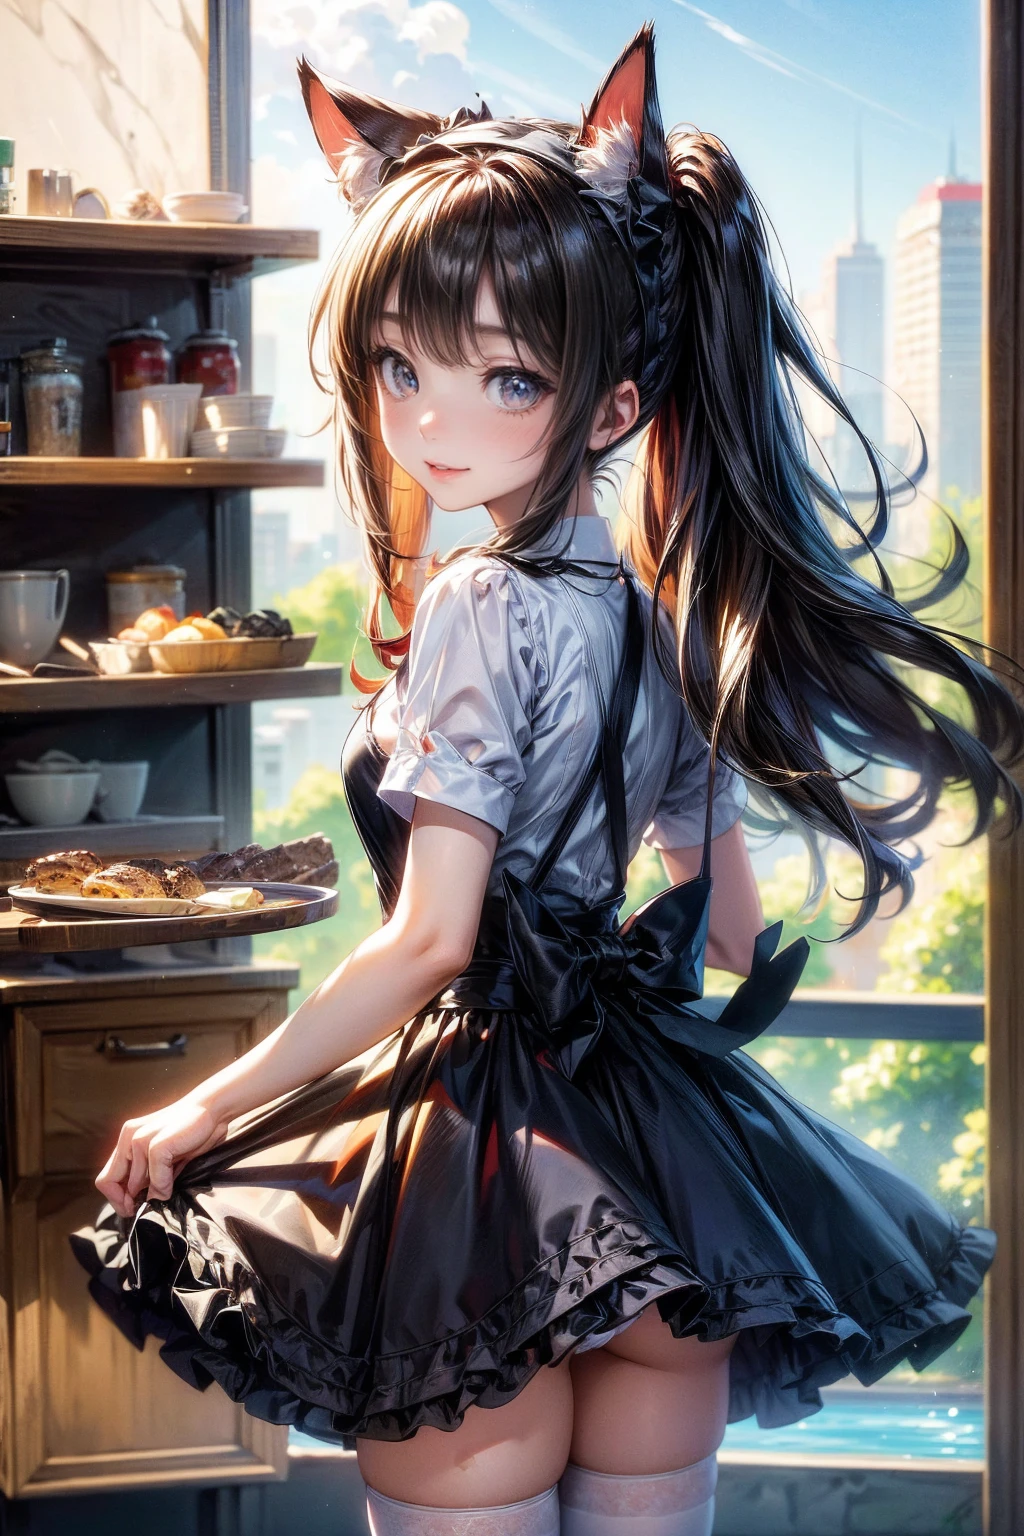 One Girl、(20-year-old woman)、Cat ears headband、Cat tail、Black maid outfit、Holding a tray with two parfaits on it in one hand、With the other hand, lift your skirt to show your underwear、Short skirt、I can see your pants、White knee-high socks、Striped pants、Highest quality、8K、Beautiful Face、Mischievous smile、Wink to the viewer、View Viewer、A bright cafe with a black cat